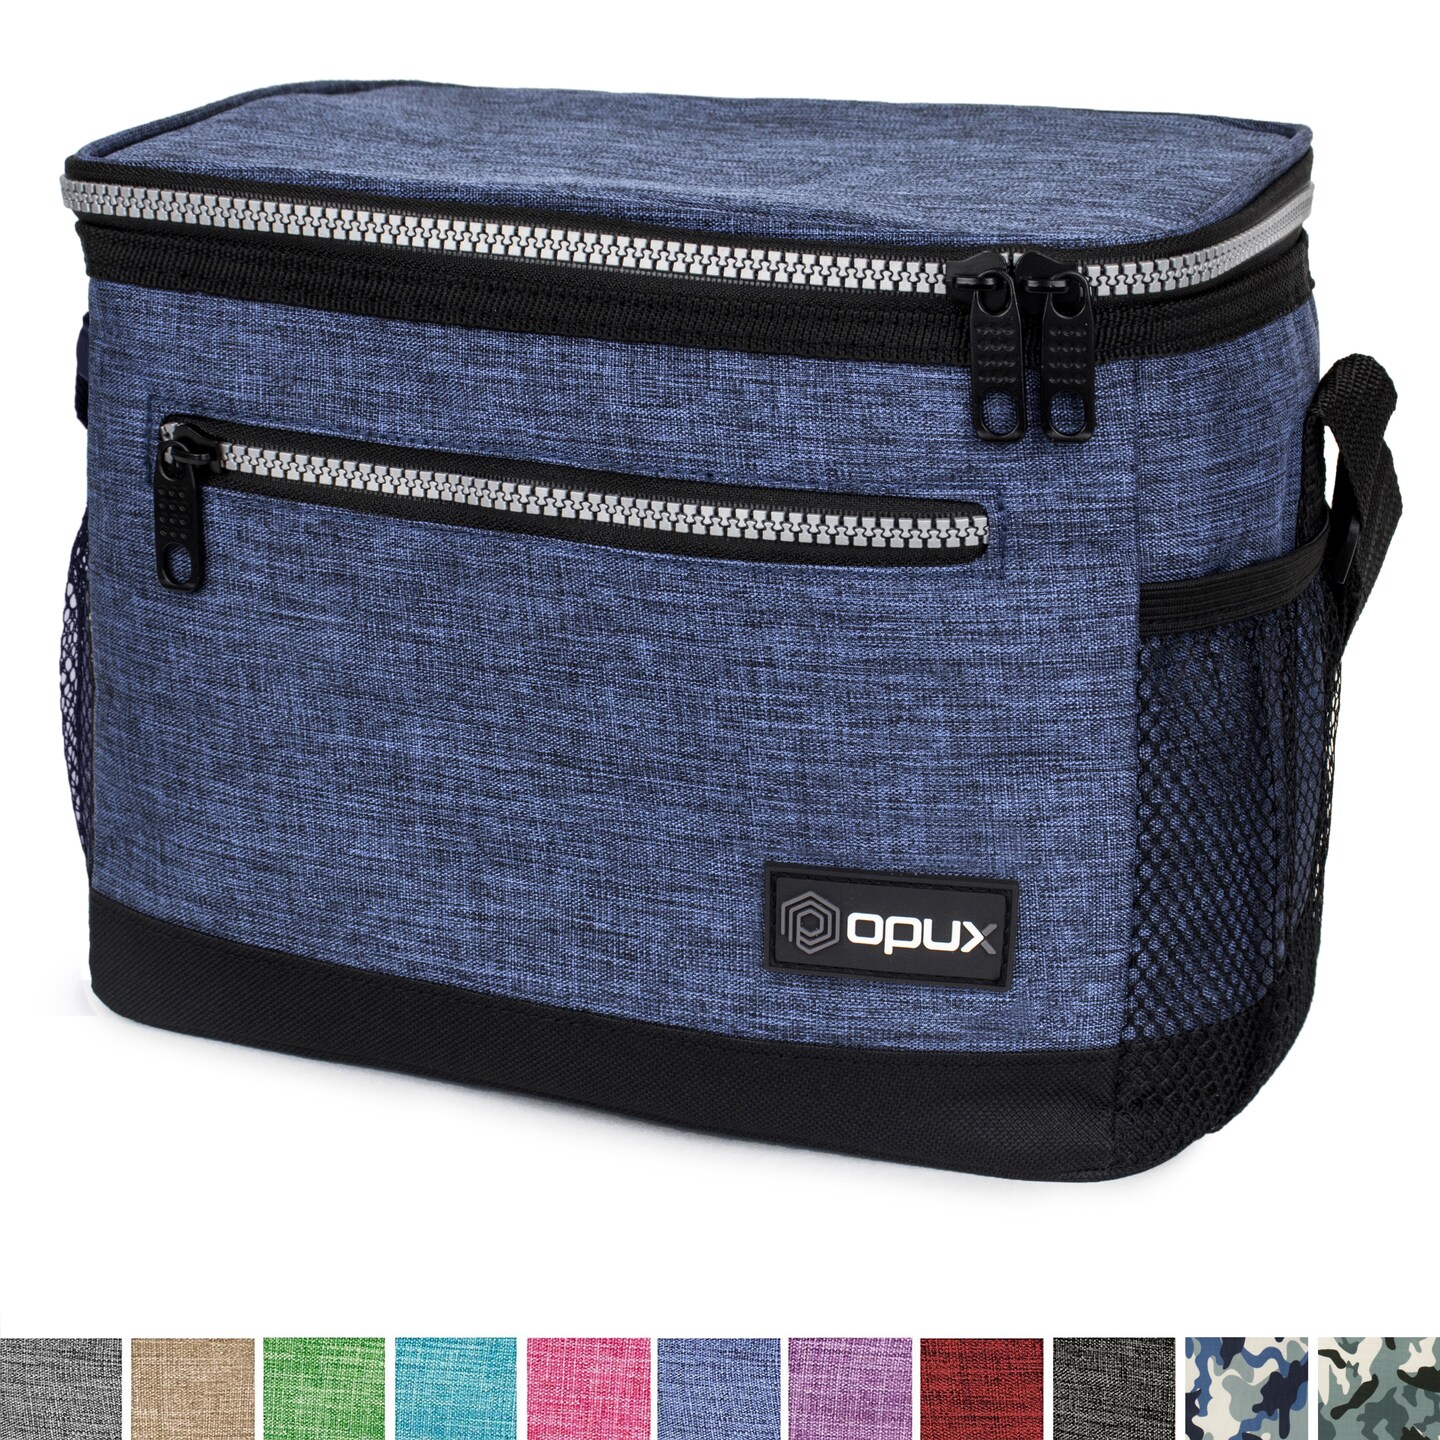 OPUX Large Insulated Lunch Bag for Men Women, Leakproof Thermal